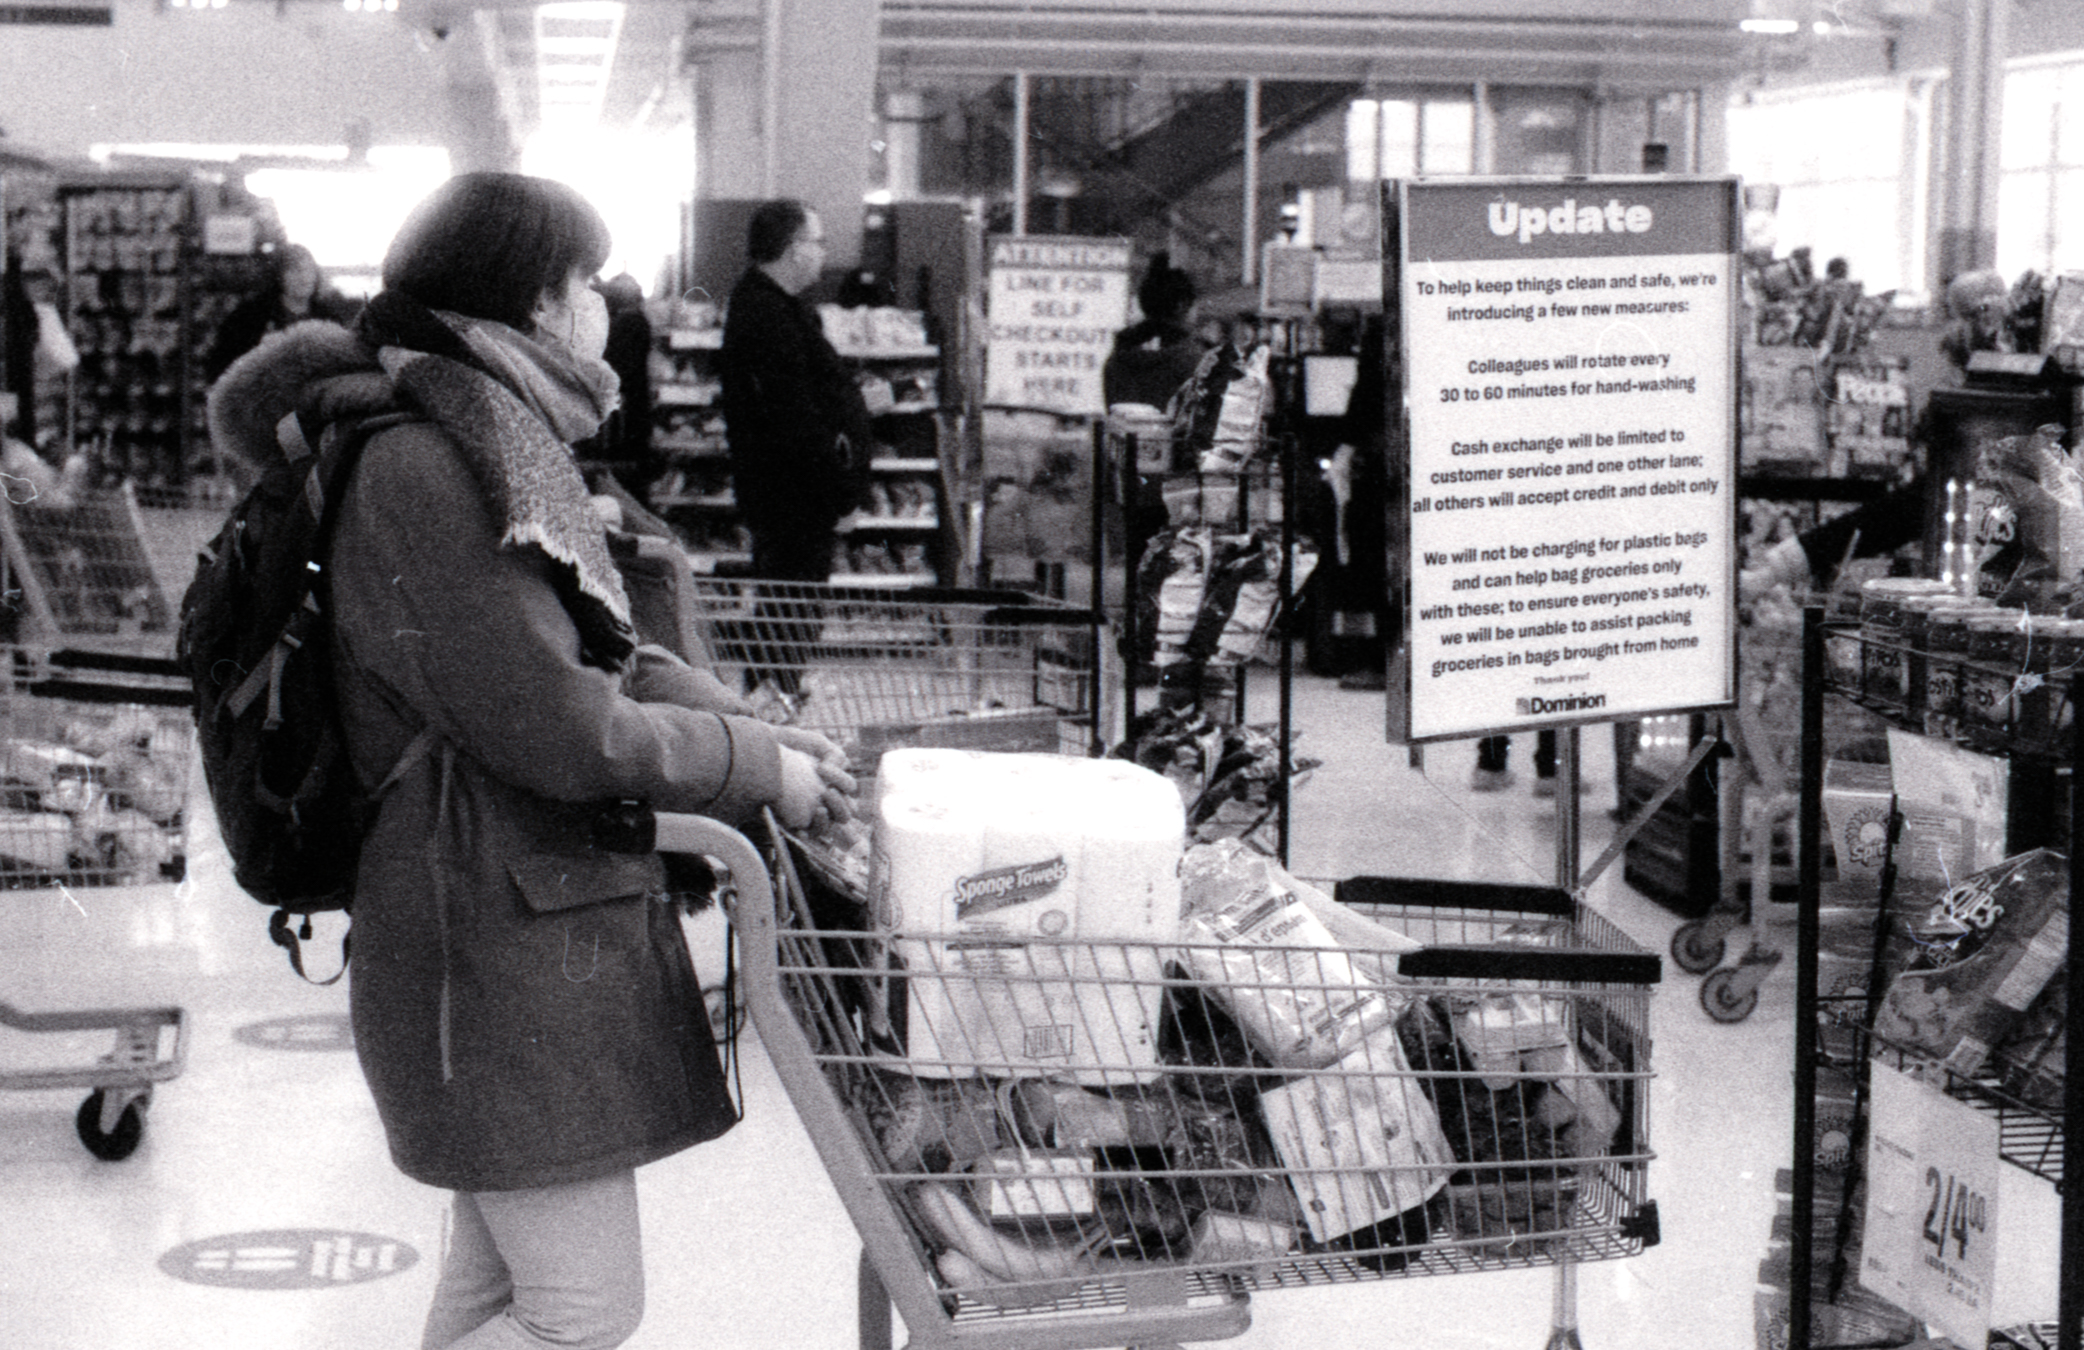 The Grocery stores got on board with Social distancing practices and were quite orderly - LakeView Dominion 